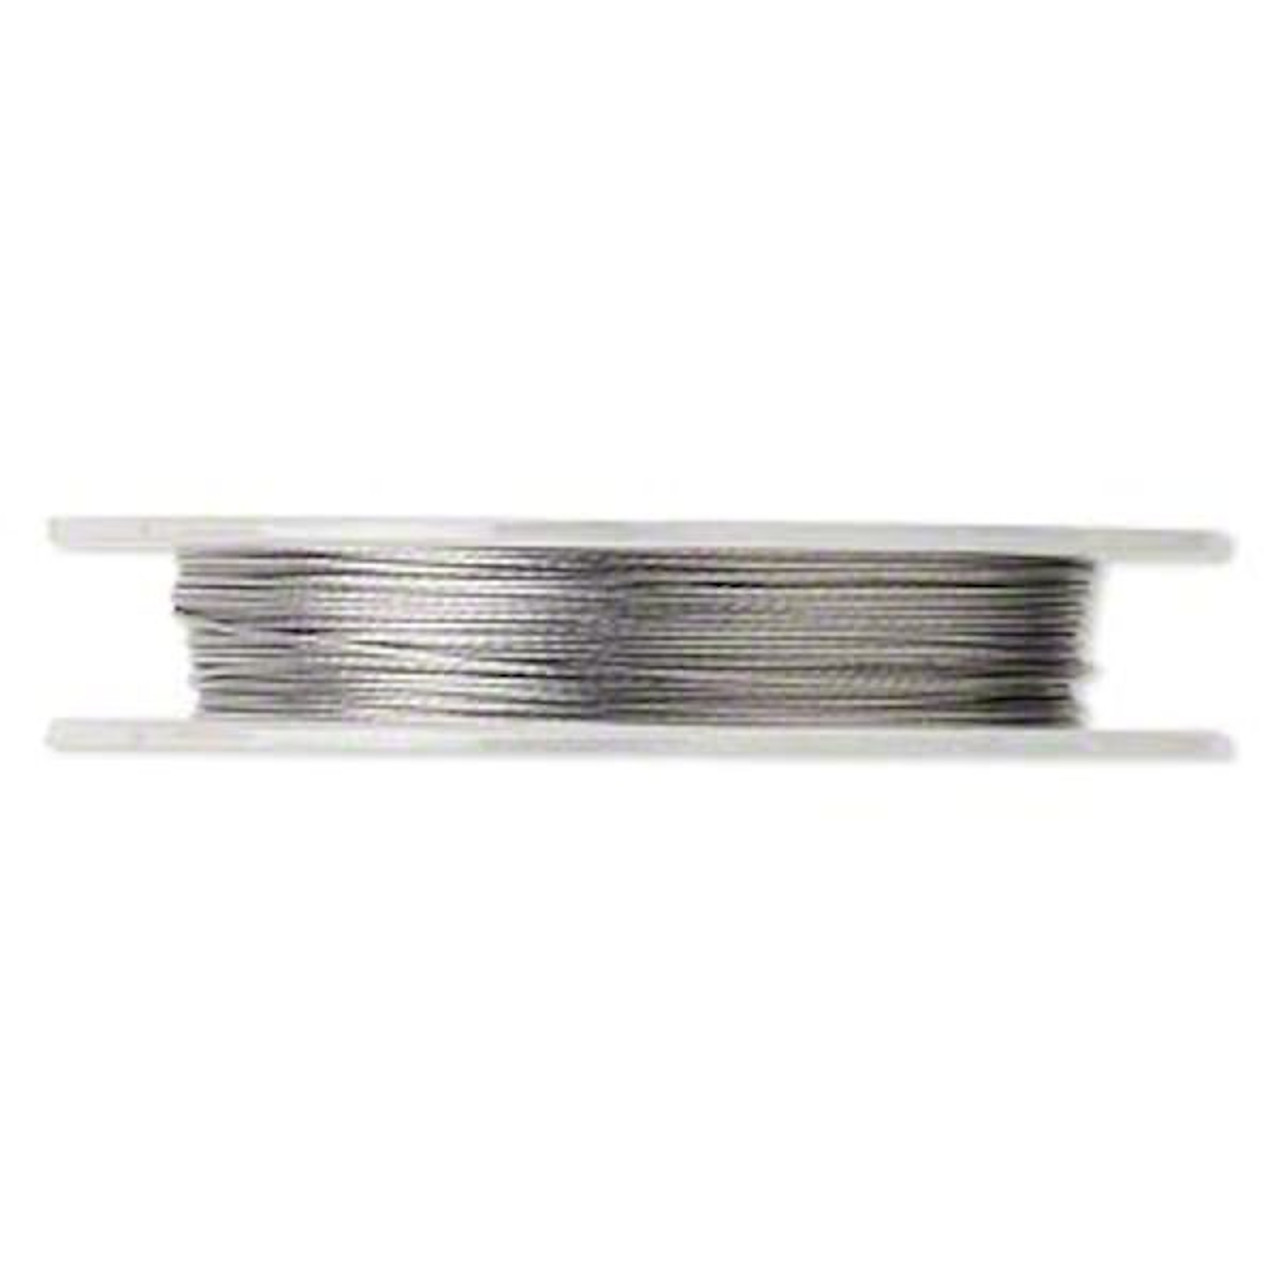 Tiger Tail Beading Wire 7-strand 12m Silver